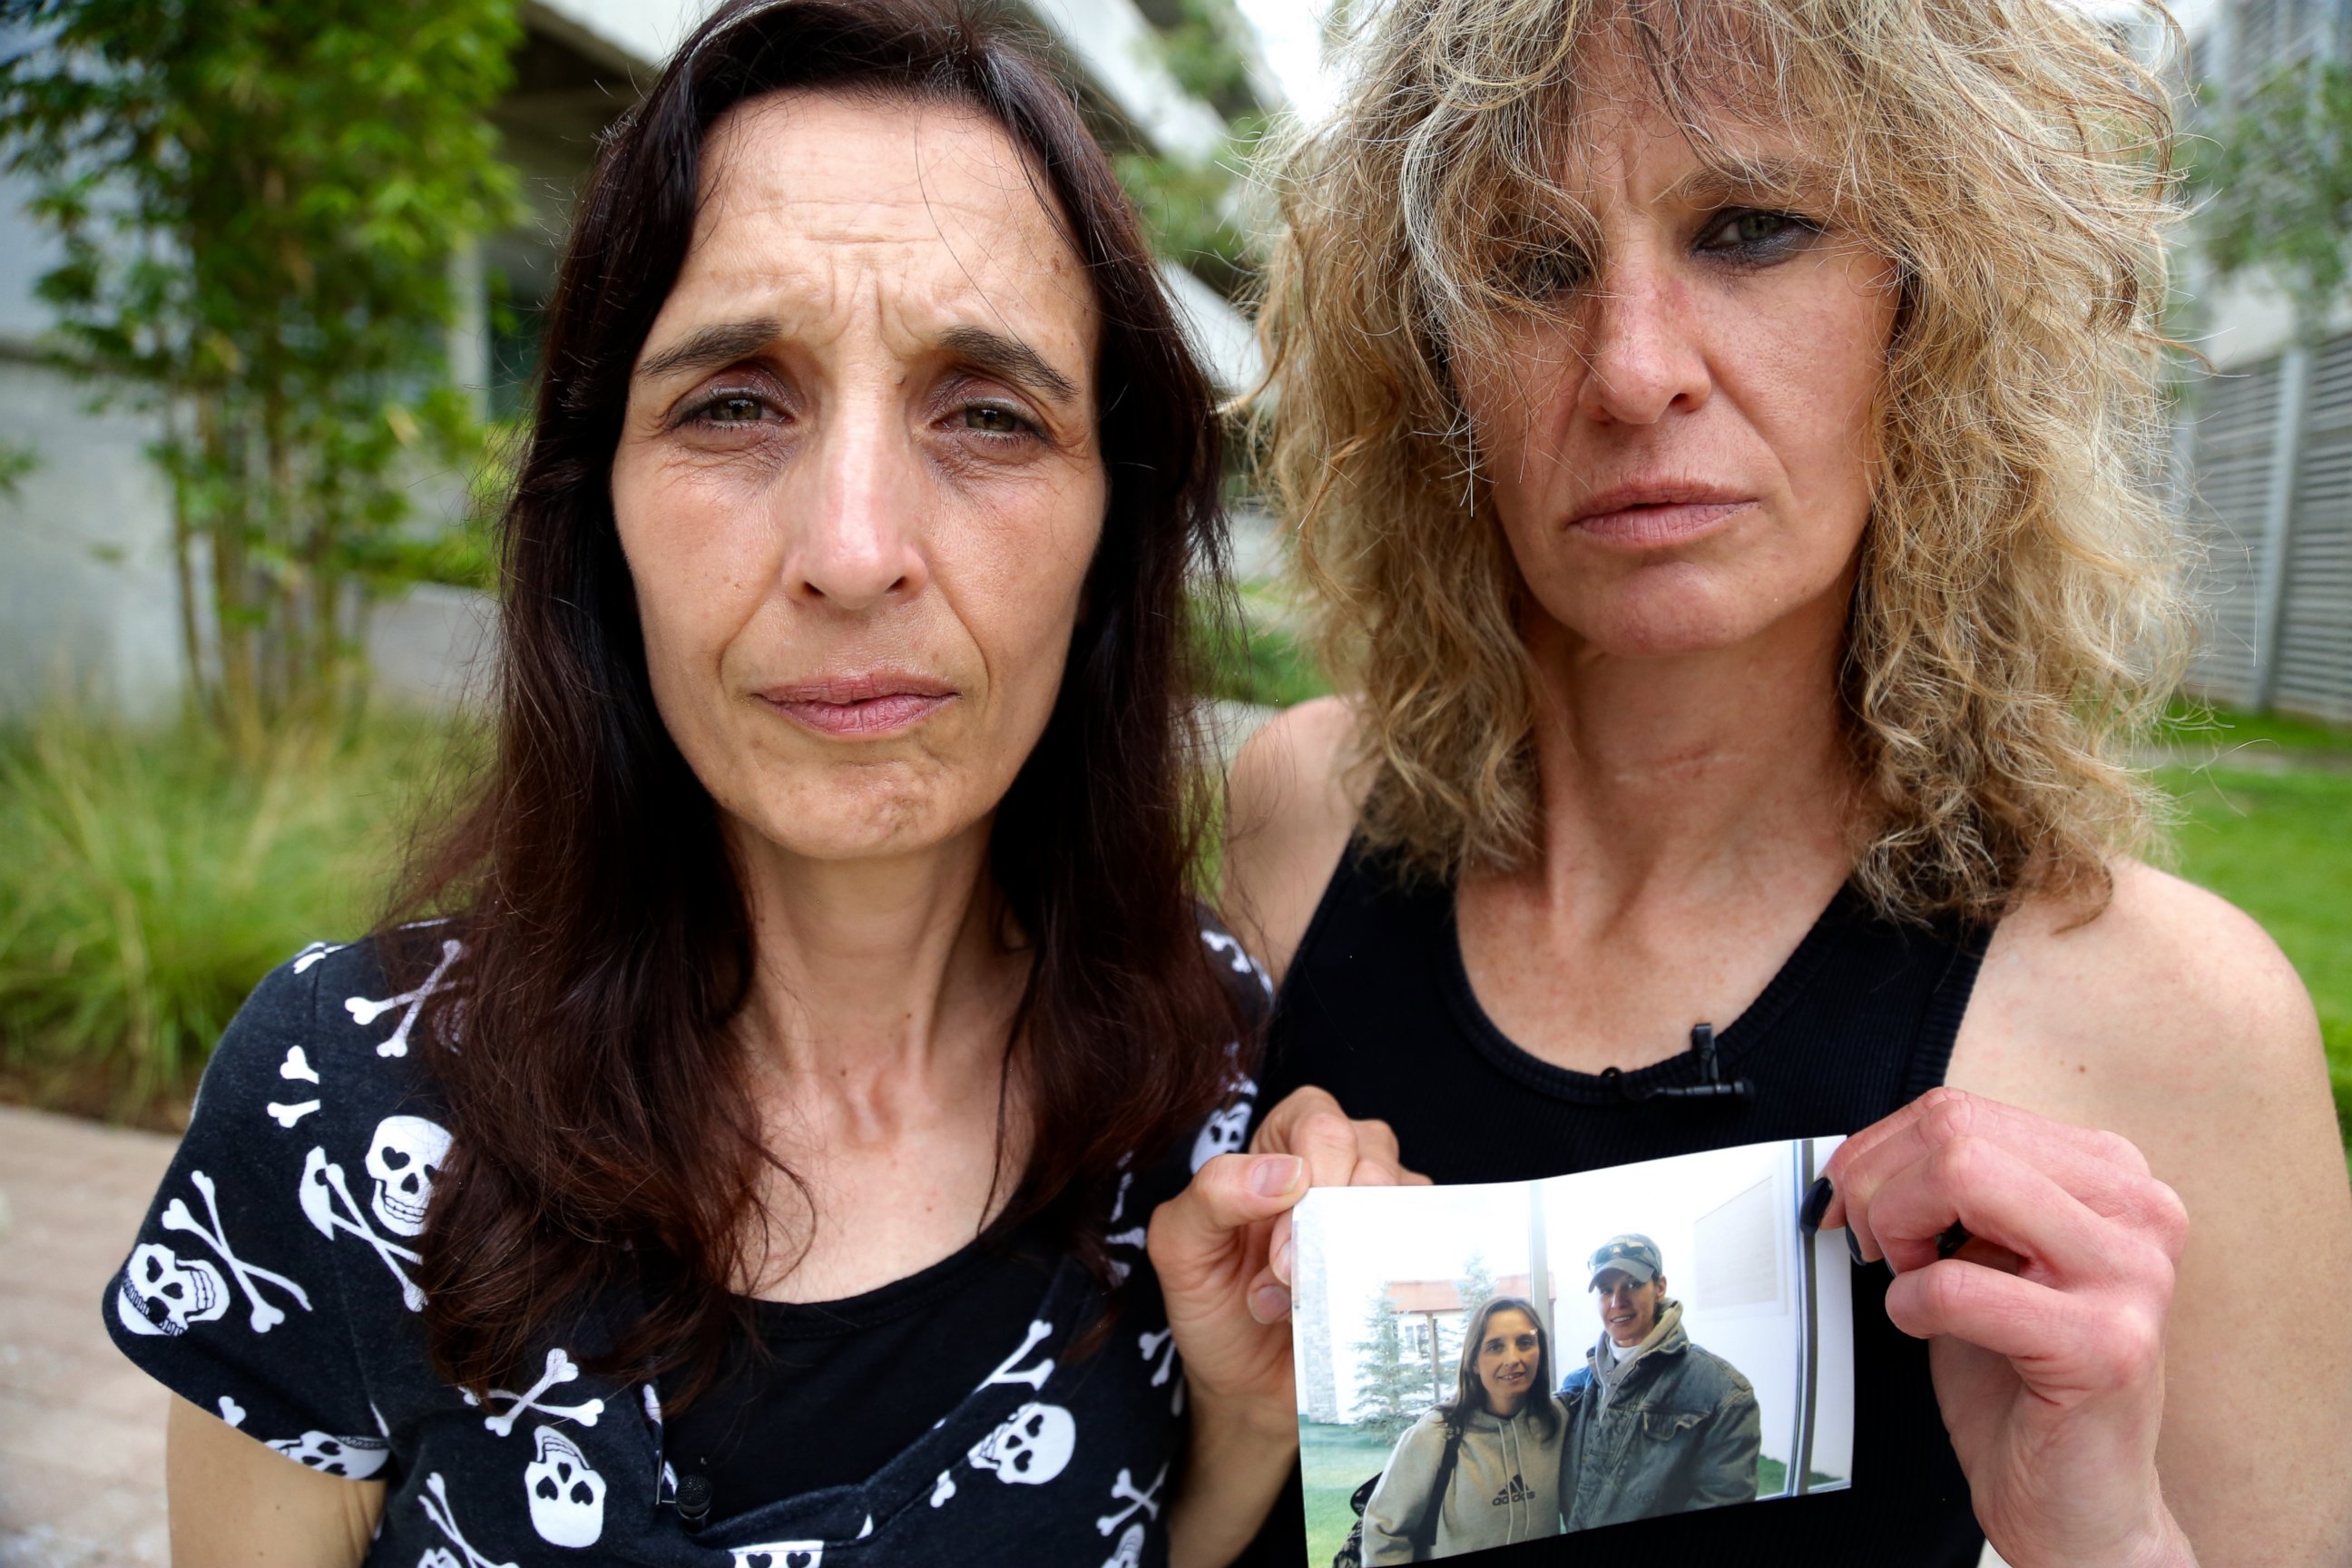 Leigh Erceg, right, and her friend Amber Anastasio, left, are shown here holding a picture of the two of them taken before Erceg's accident.